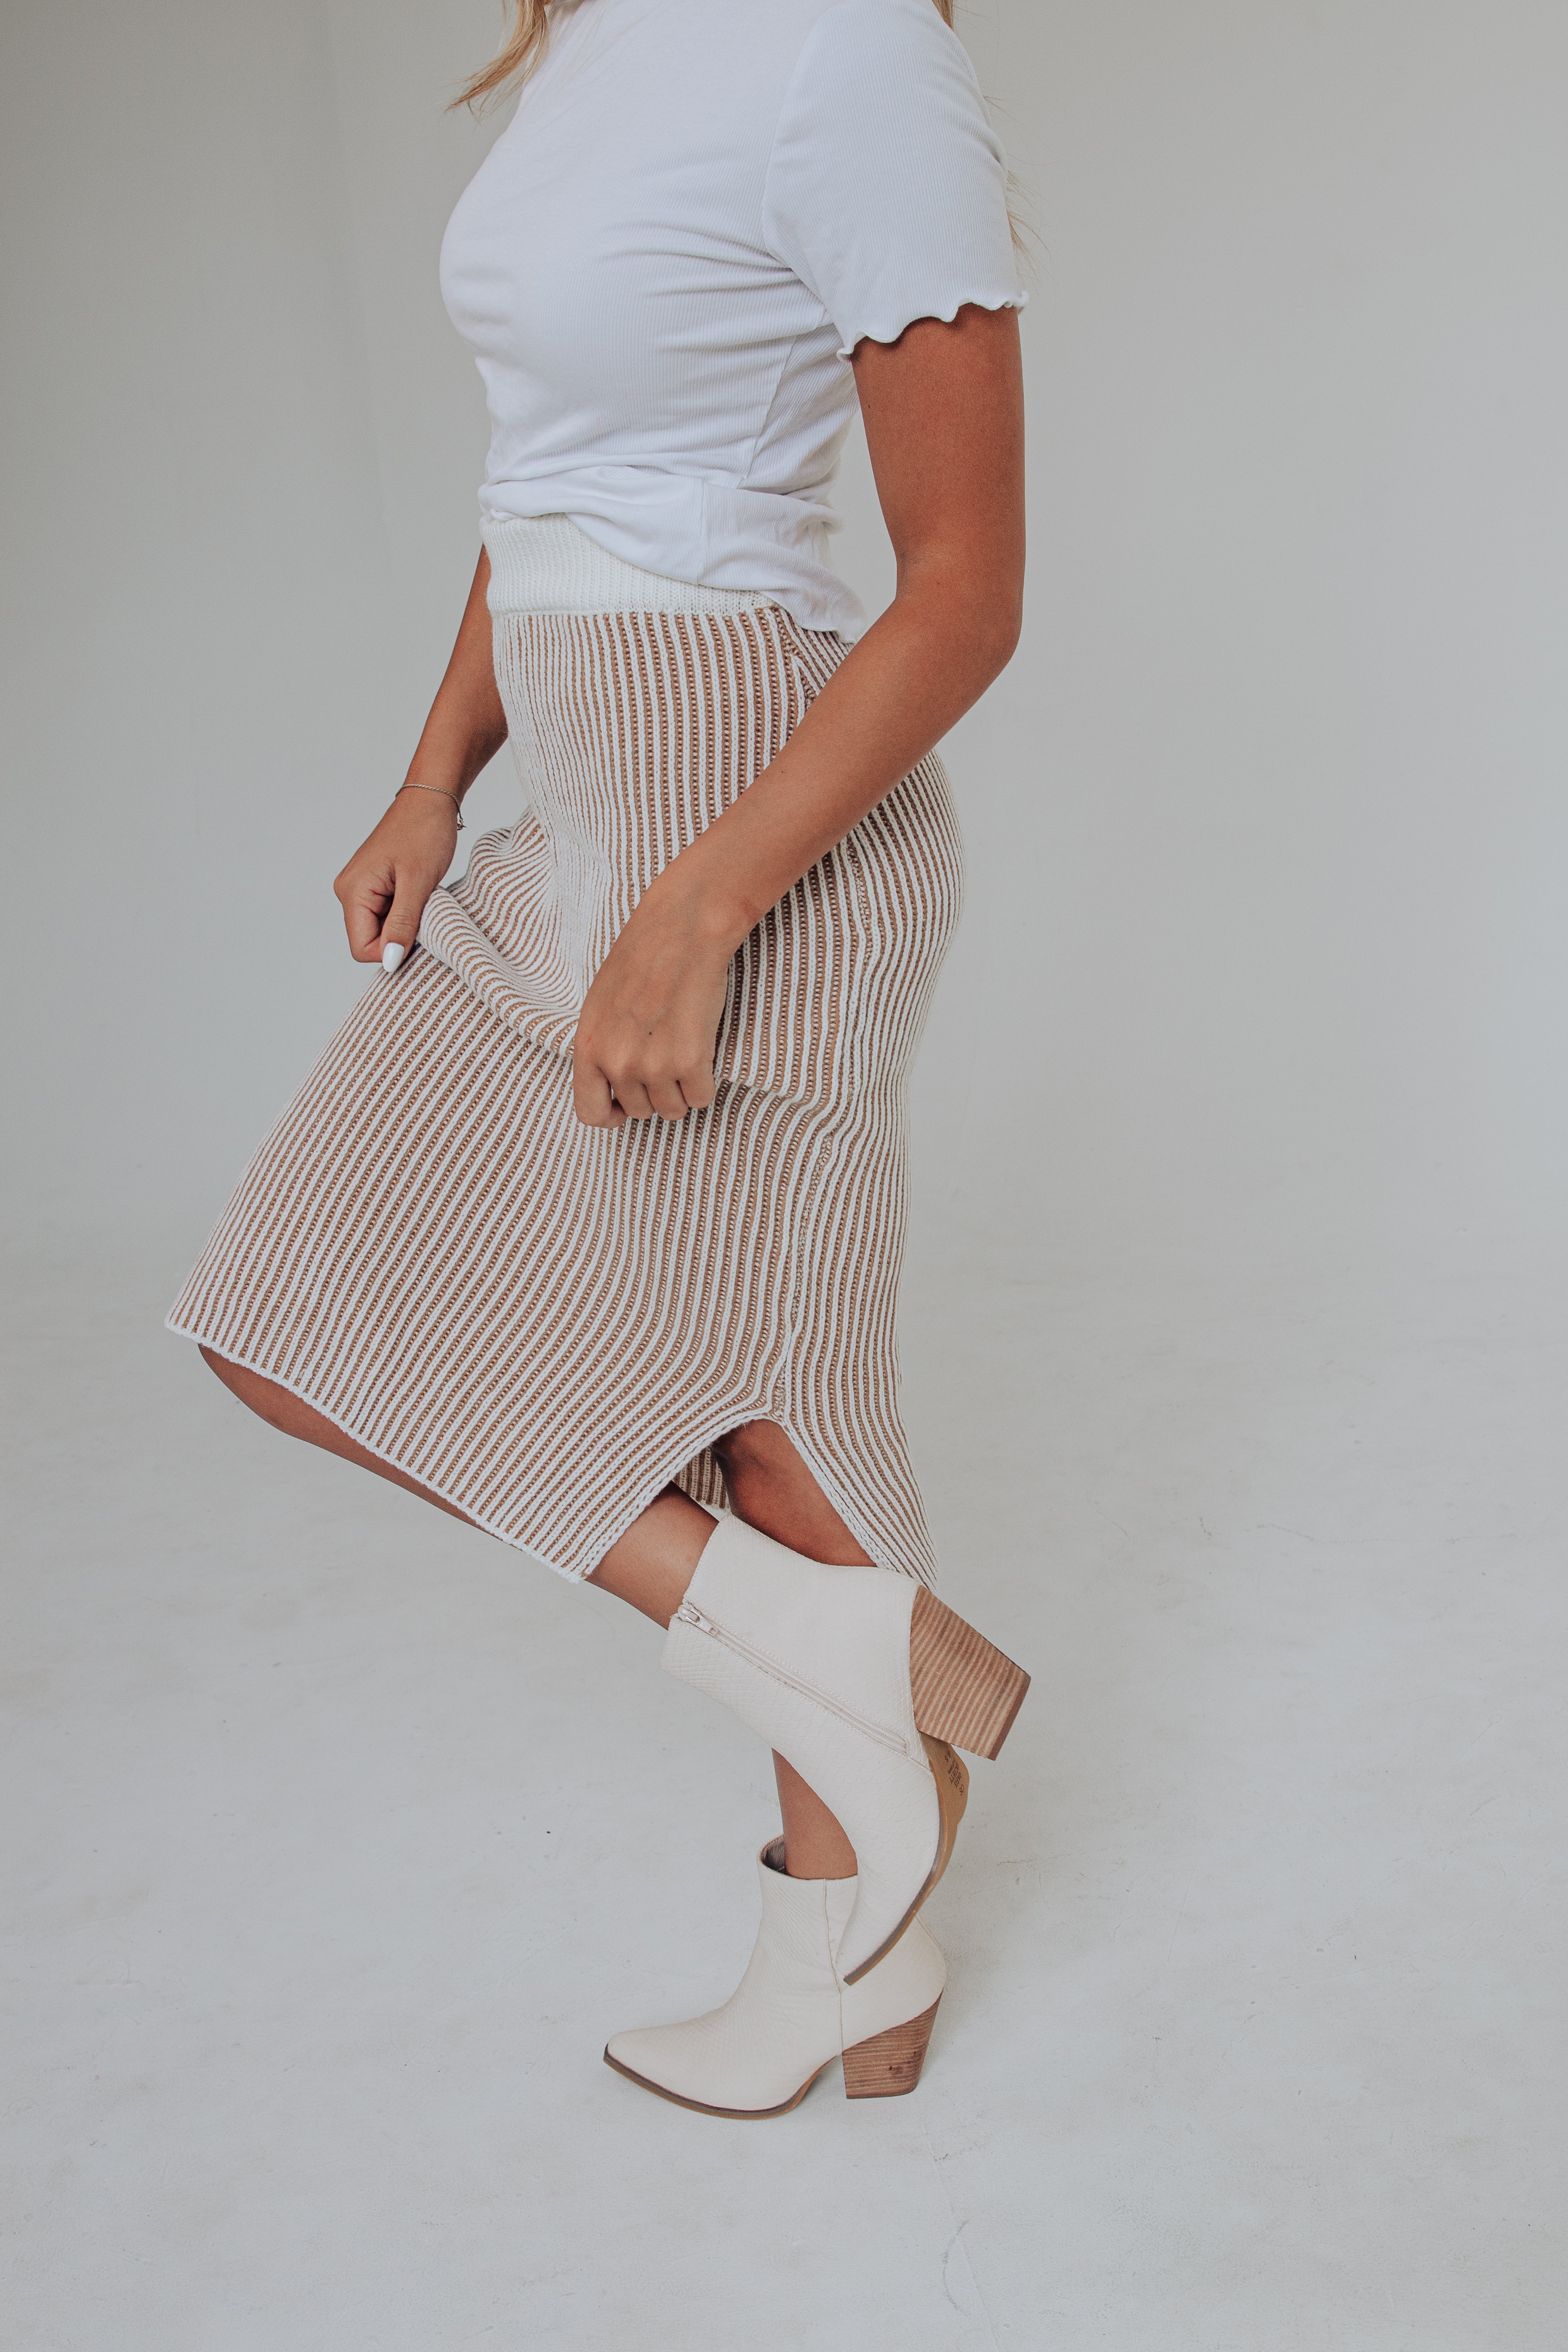 White and tan striped skirt